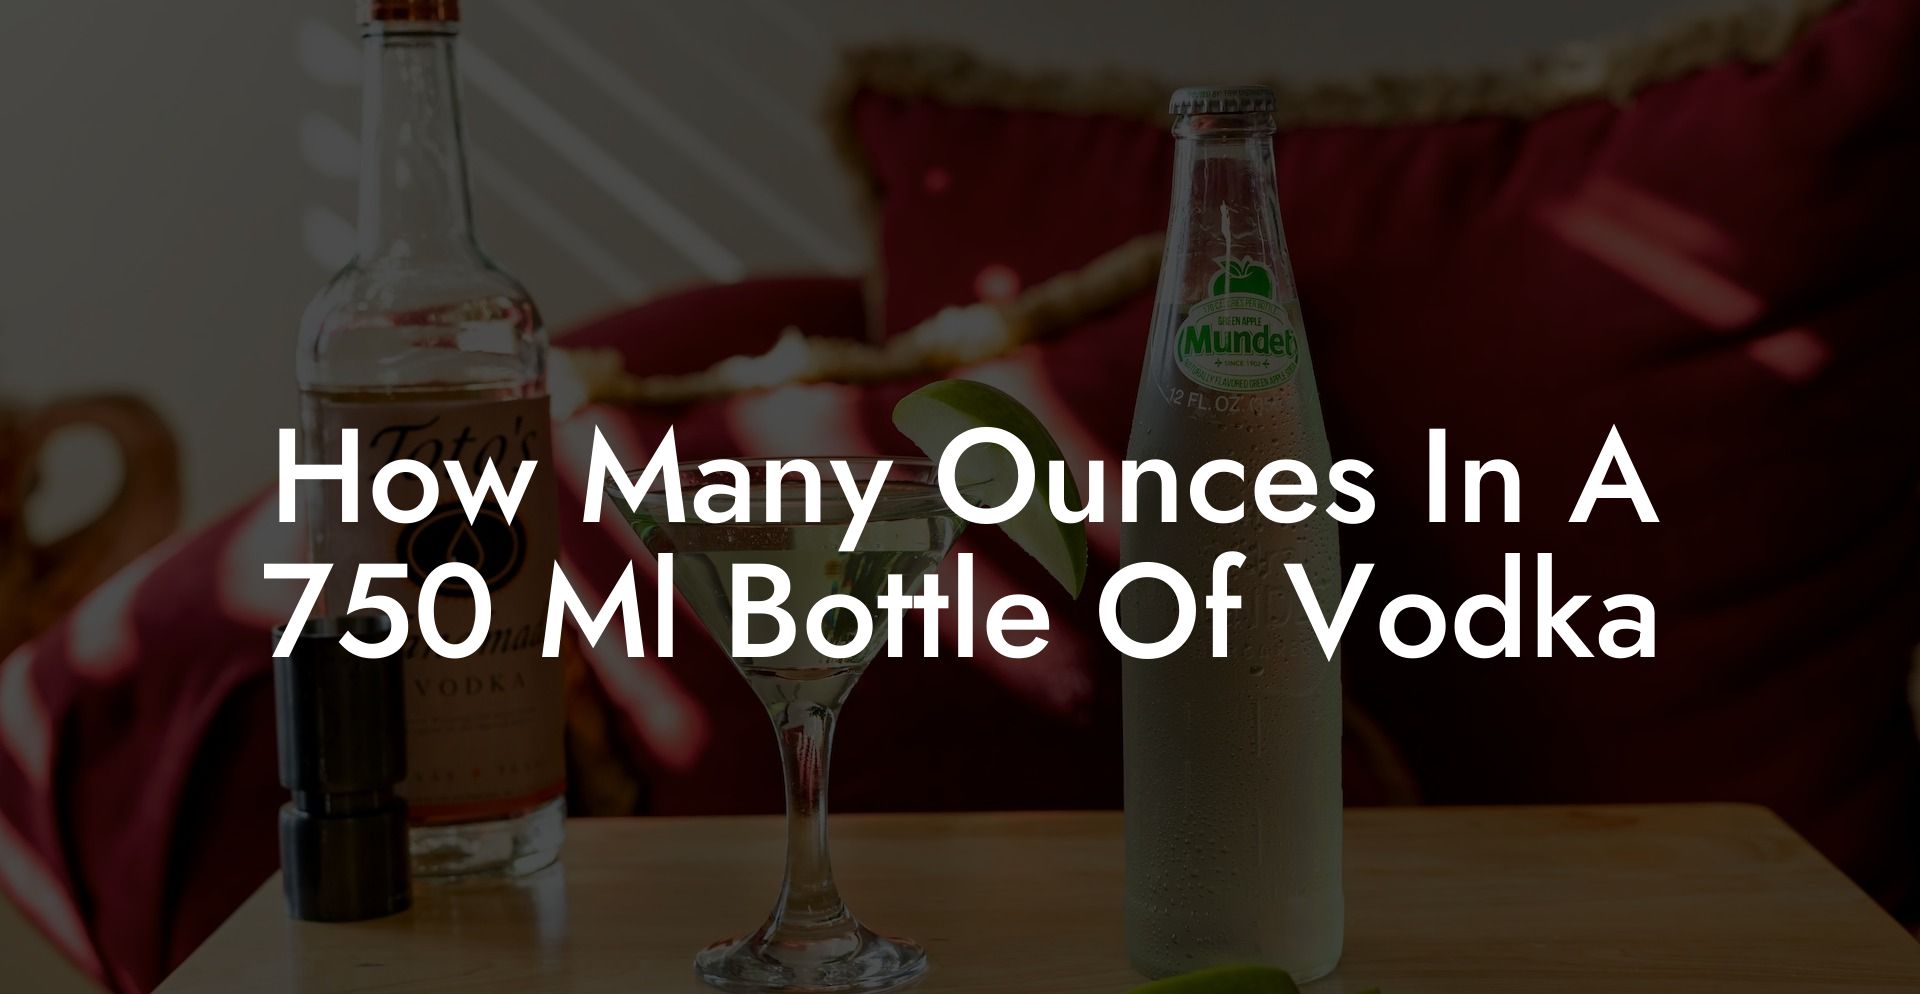 How Many Ounces In A 750 Ml Bottle Of Vodka